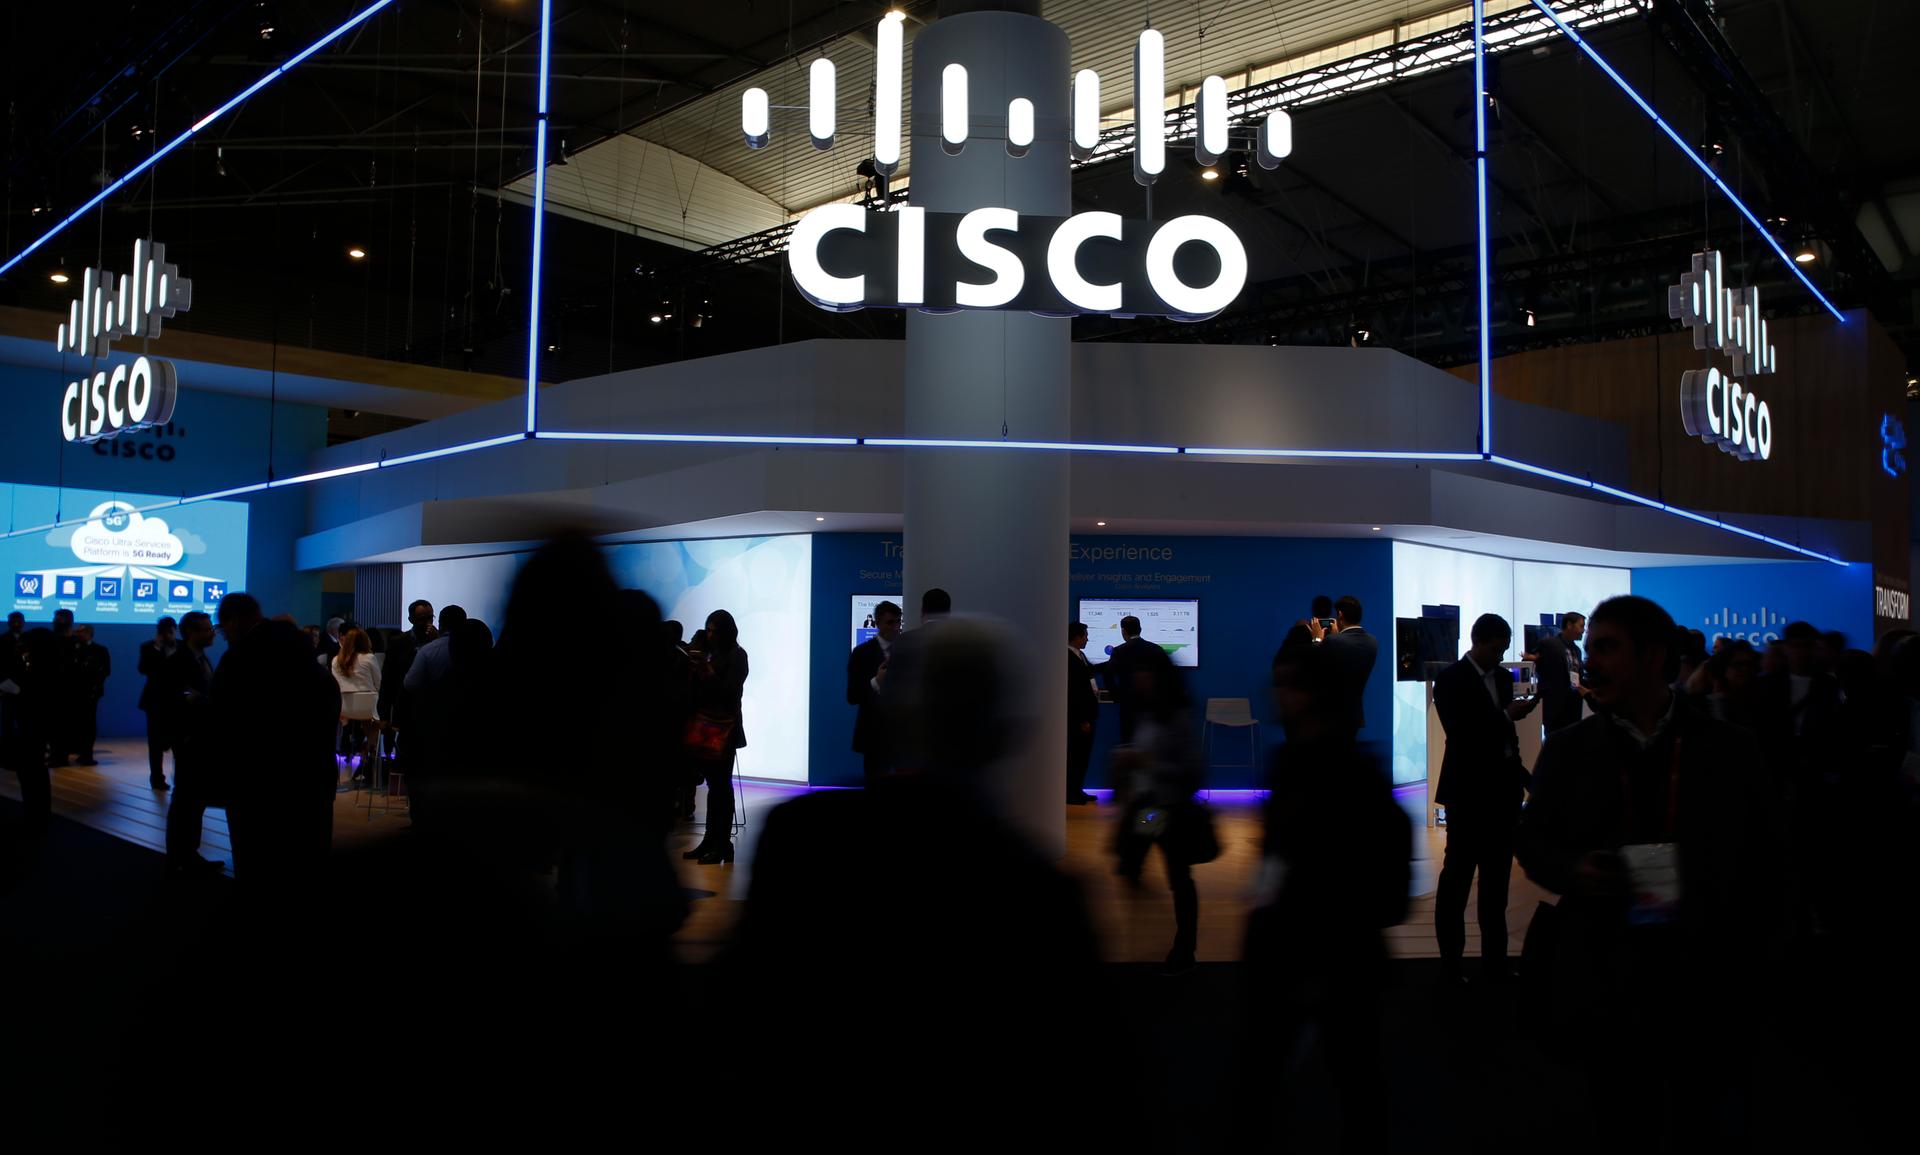 Visitors walk past Cisco's booth during Mobile World Congress in Barcelona, Spain, February 27, 2017.